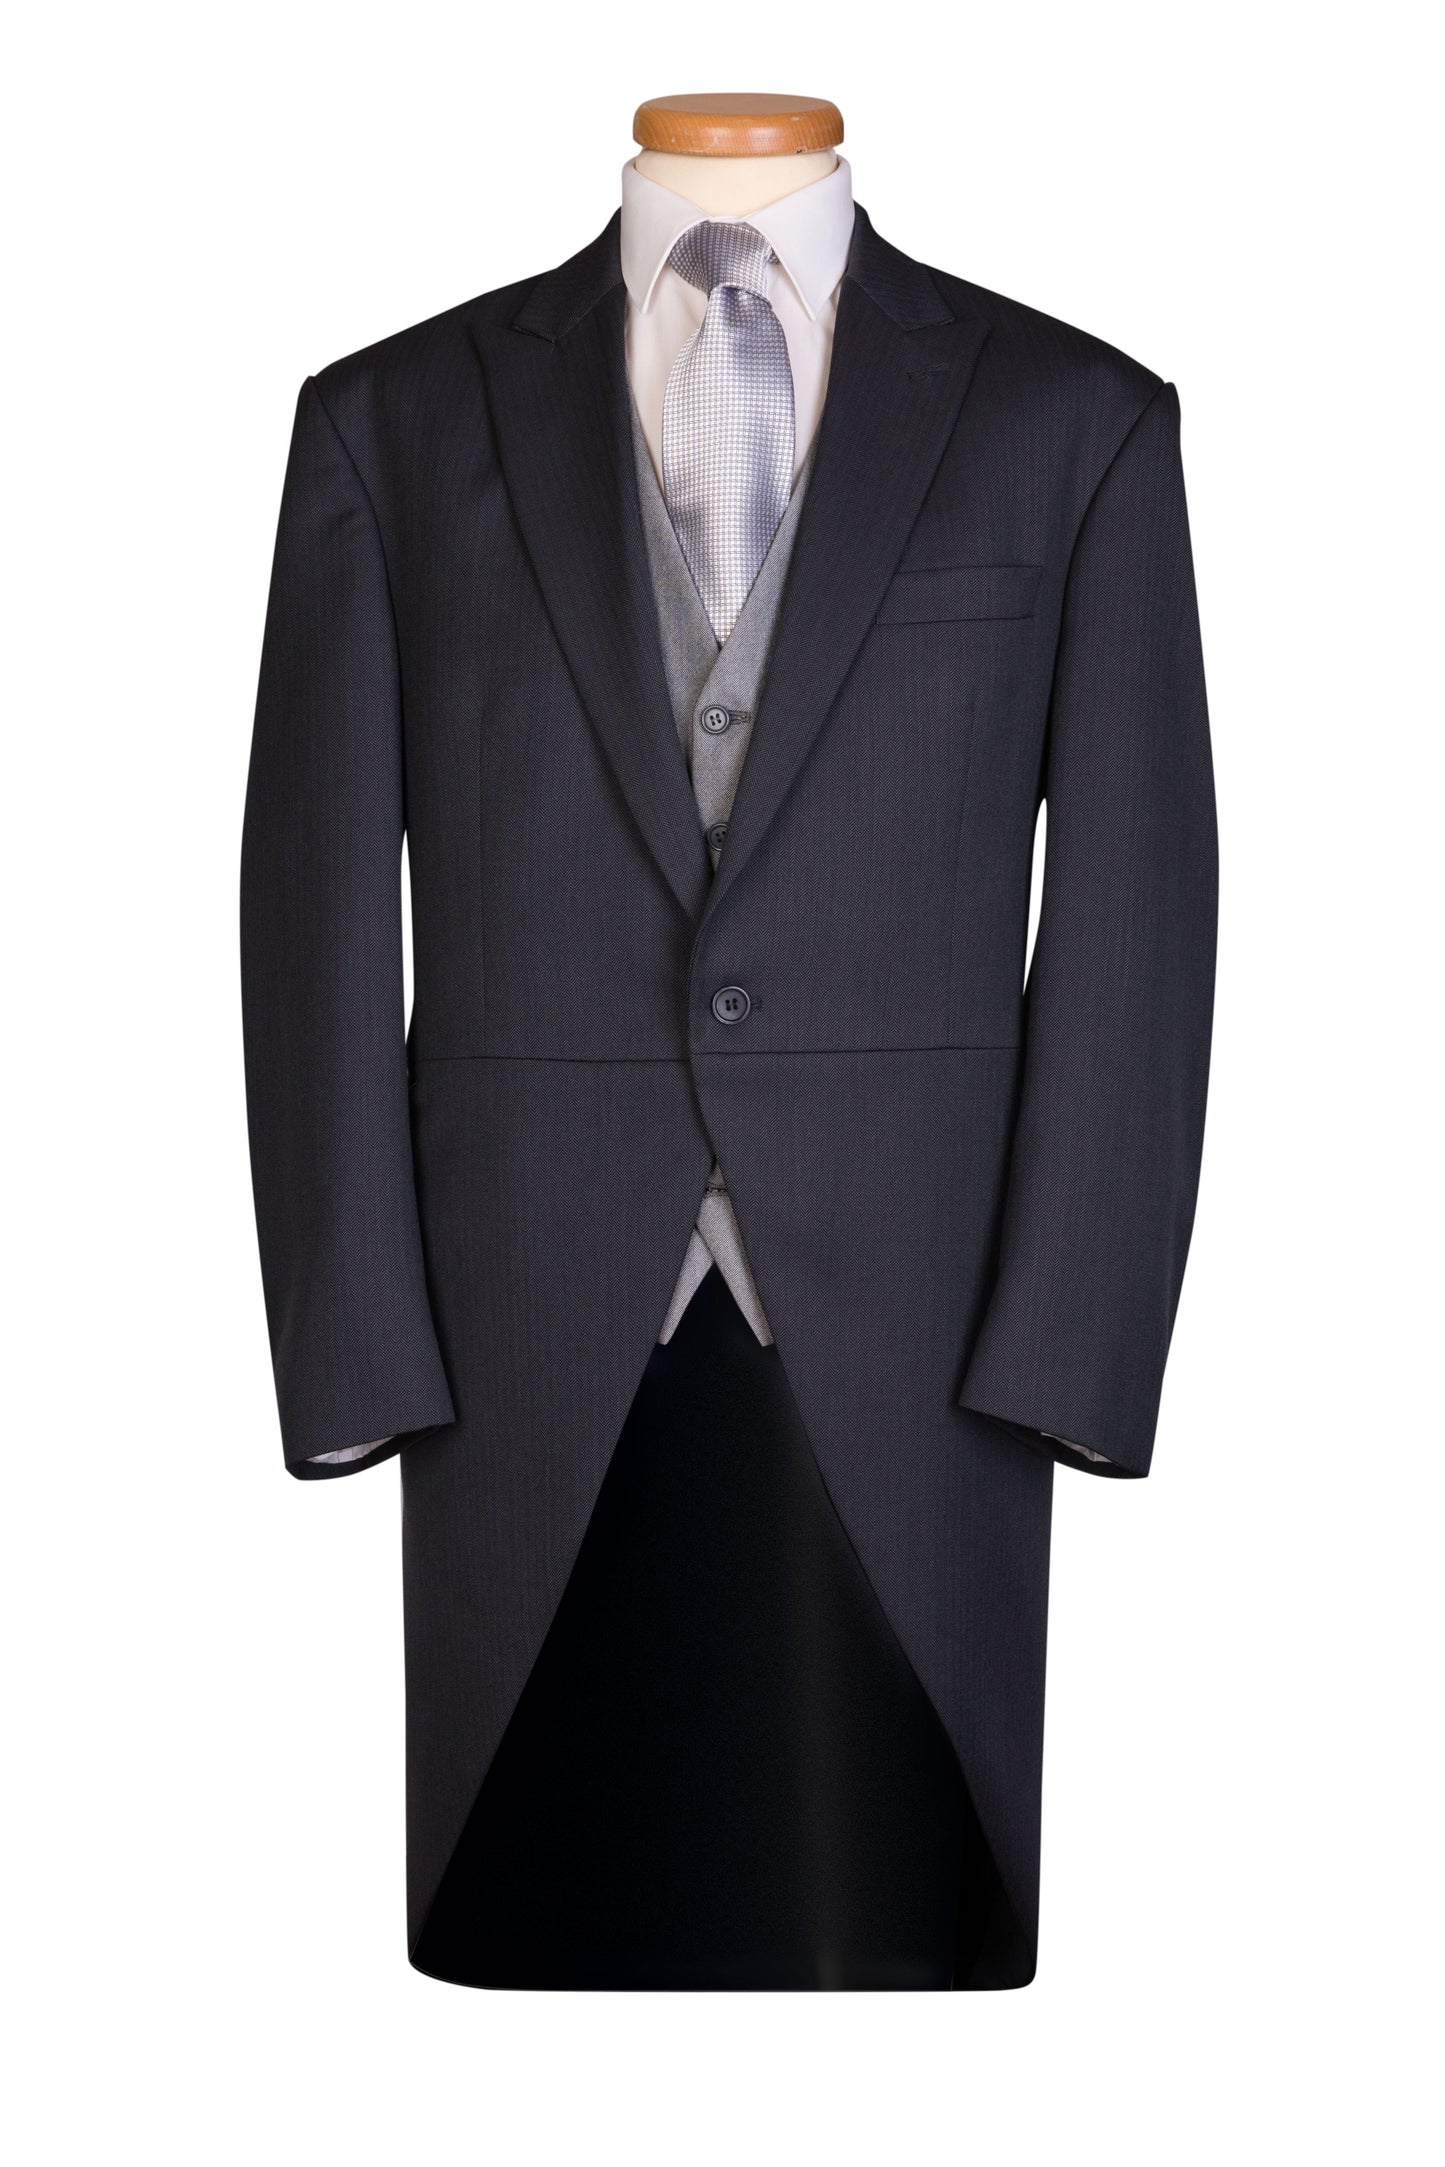 Charcoal Grey Wedding Tailcoat Matching 2 piece Royal Ascot Suit - Ex Hire